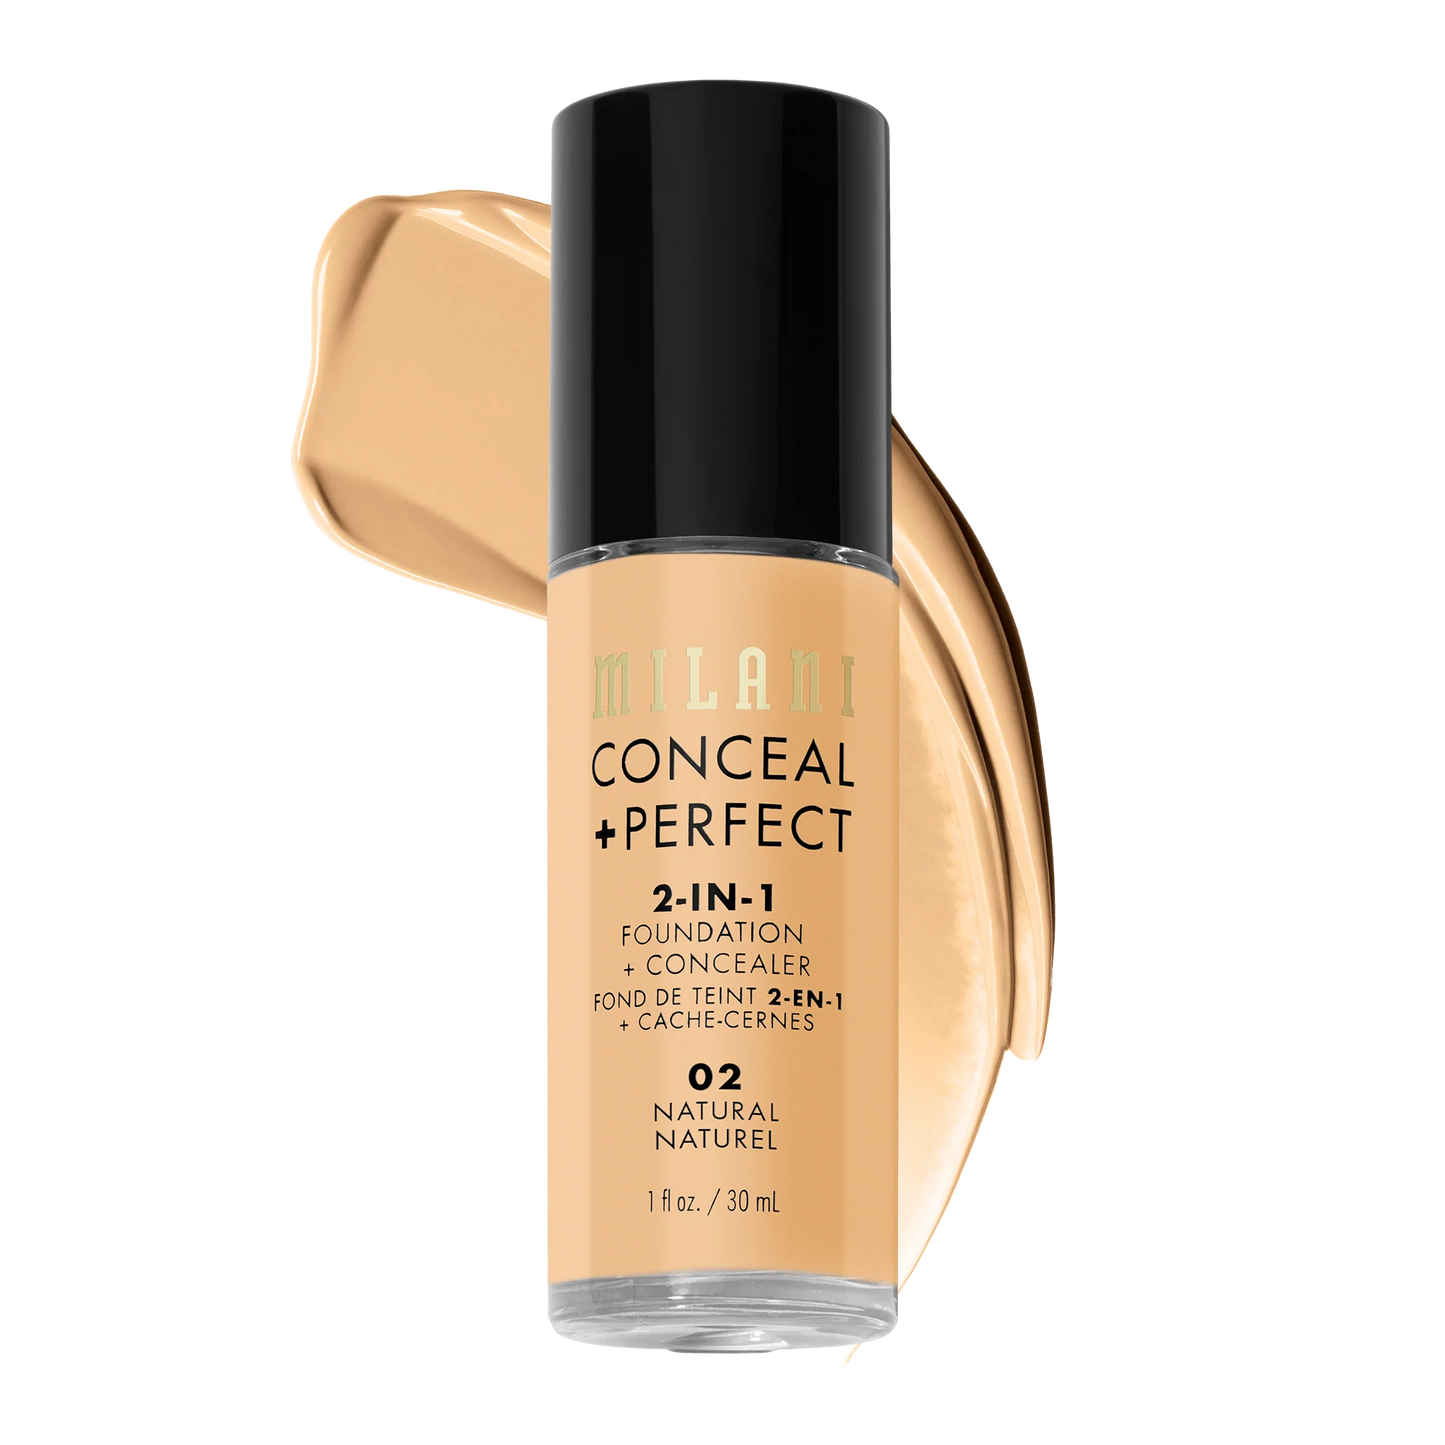 Conceal + Perfect 2-IN-1 Foundation - 8 сонголттой